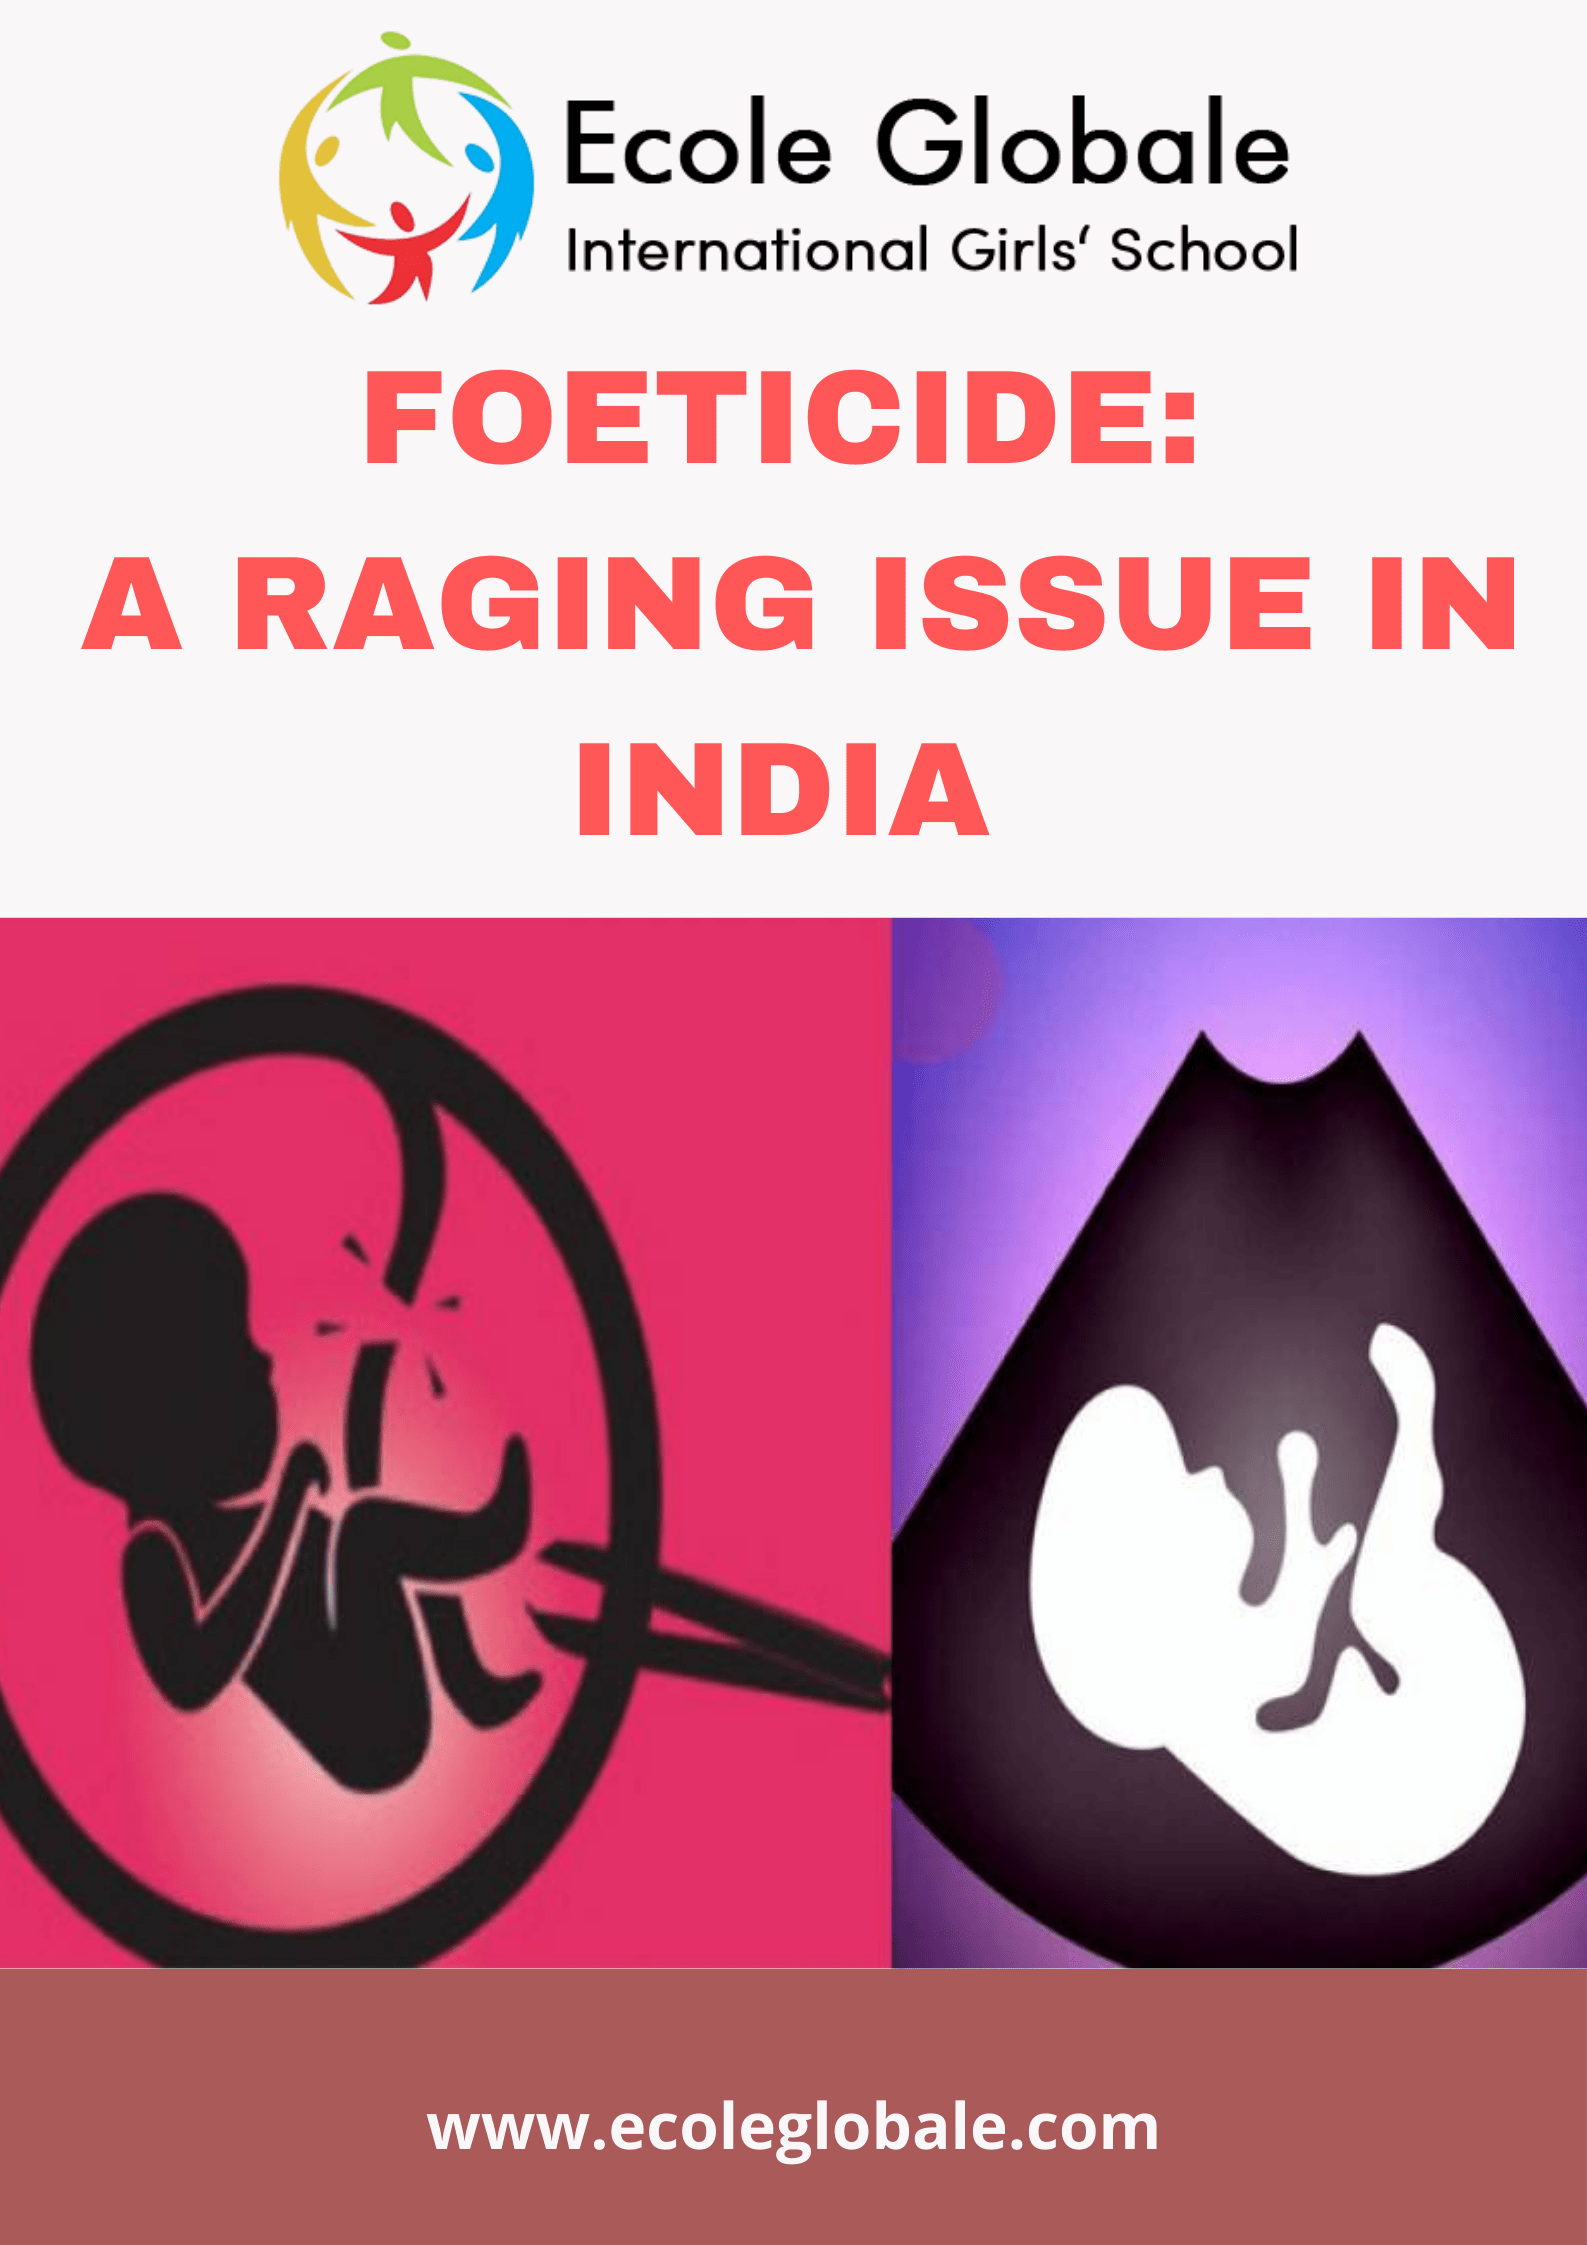 Foeticide: A Raging Issue In India